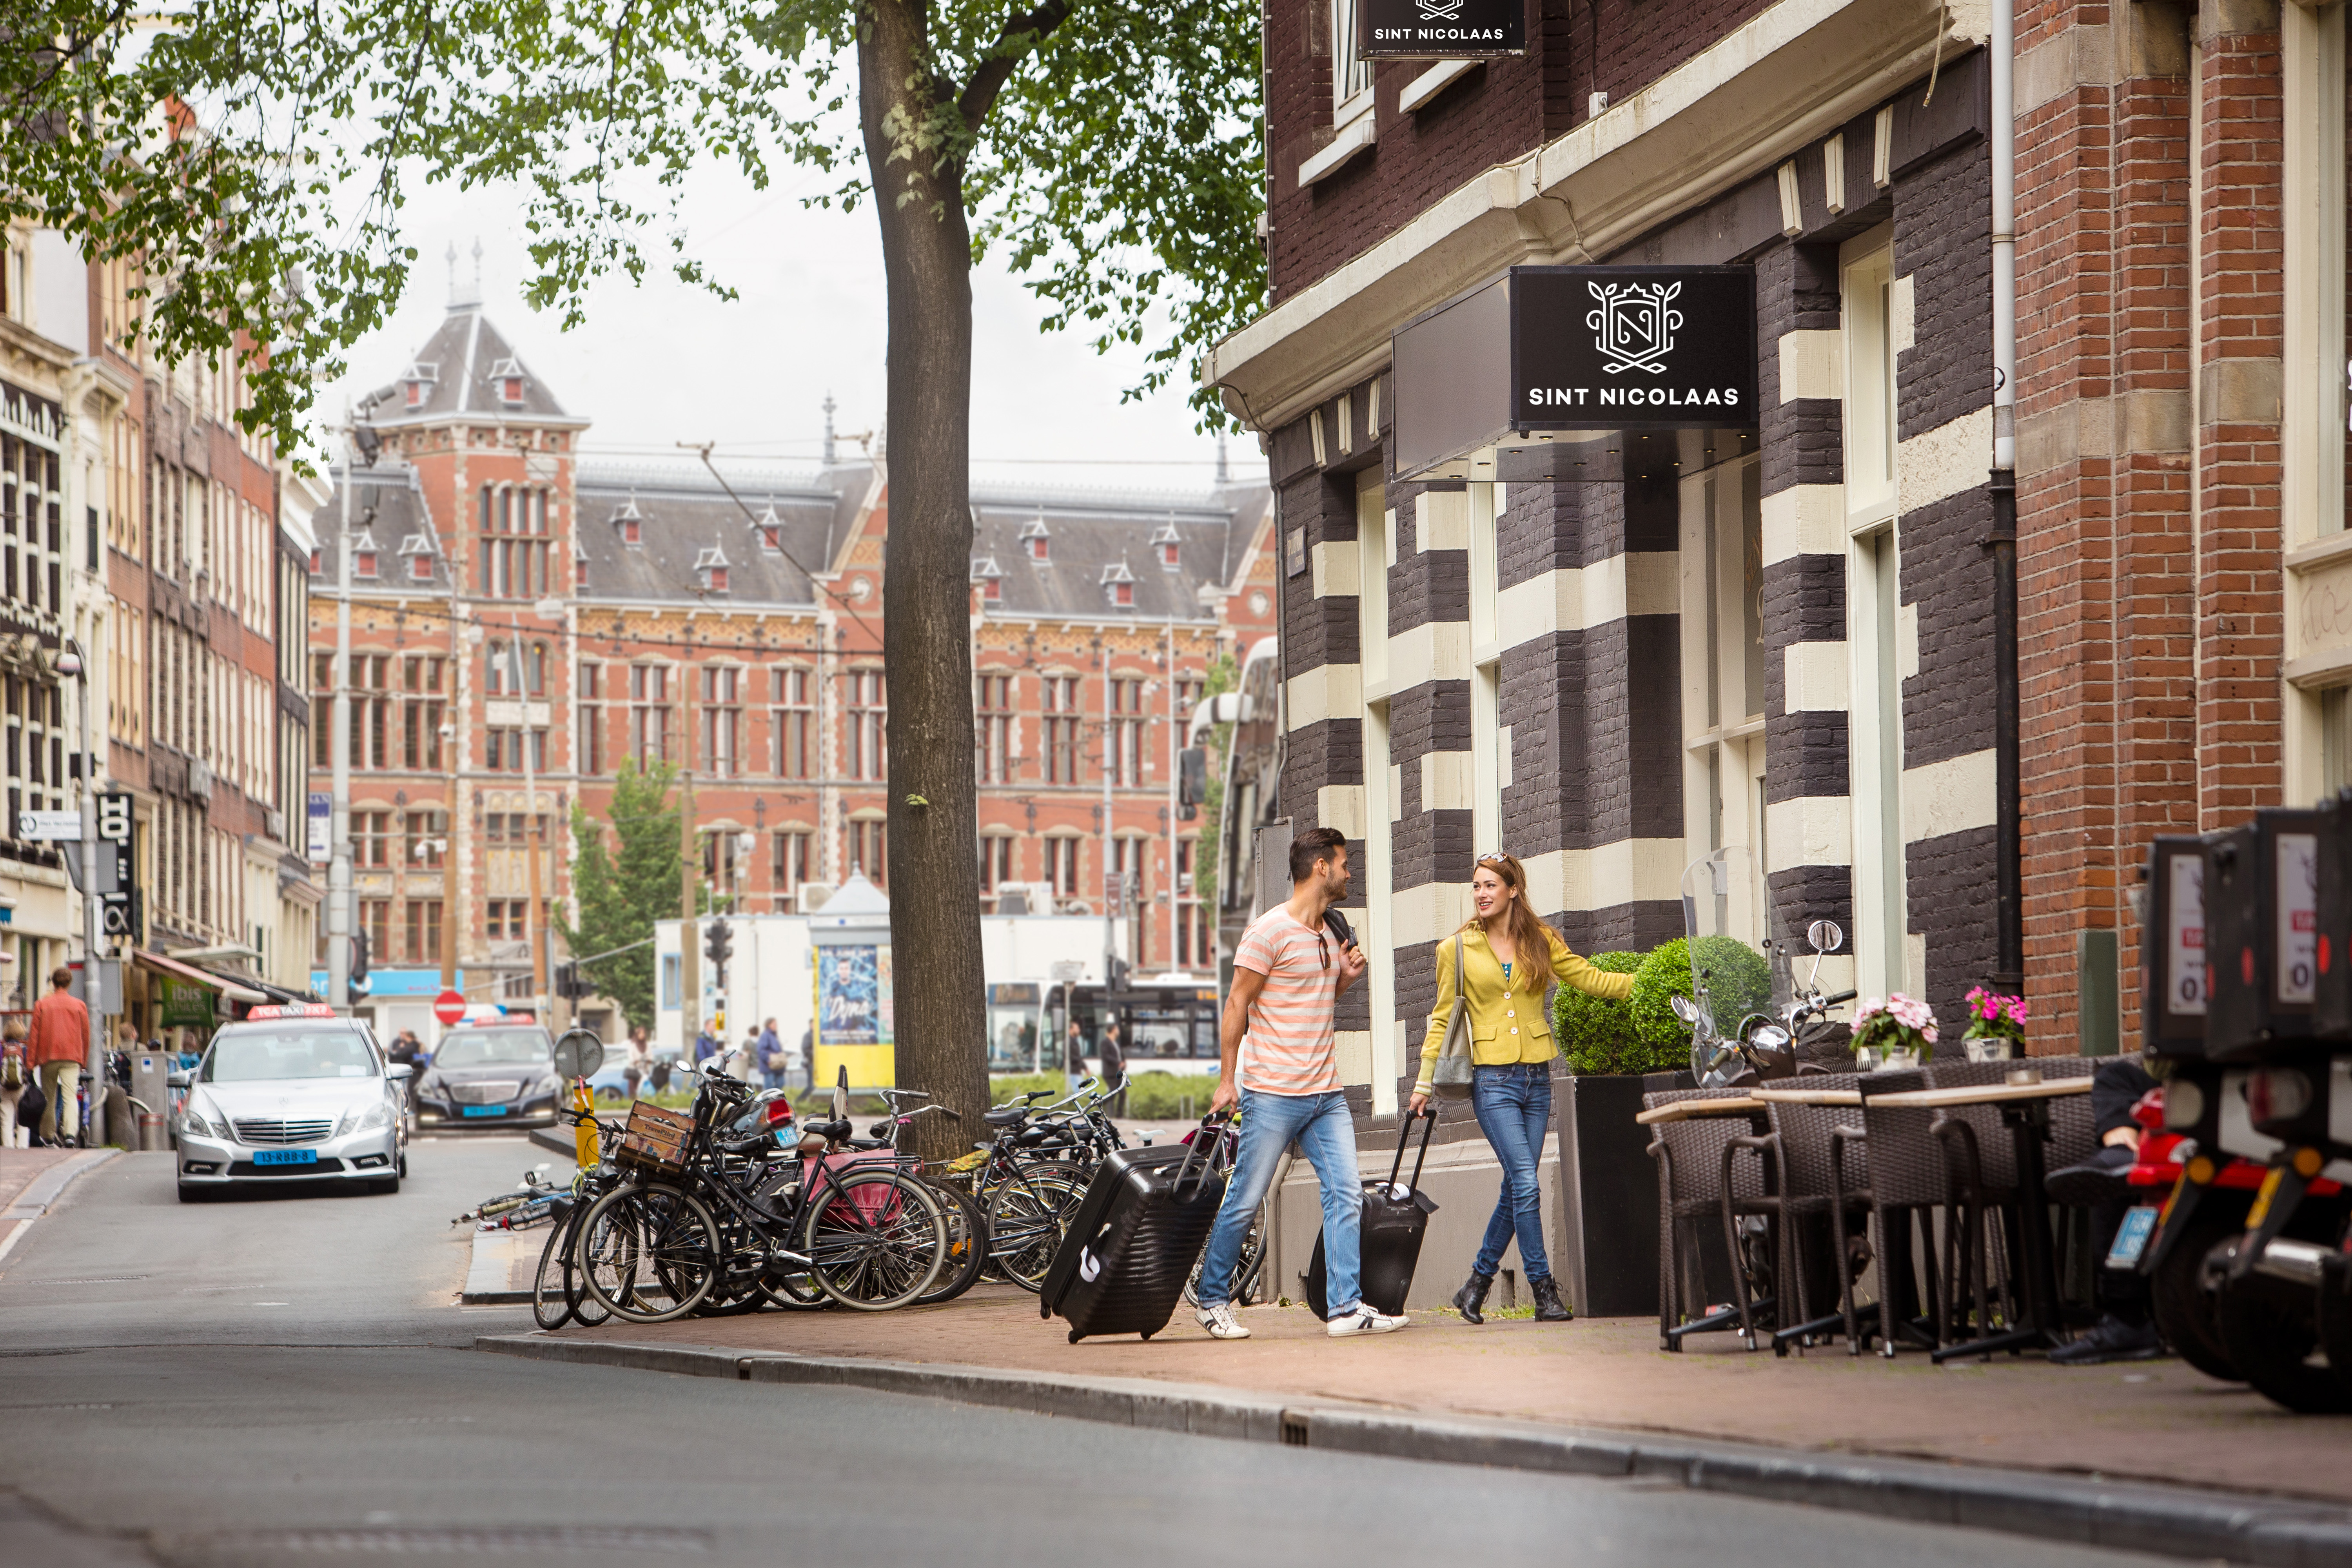 Hotel Sint Nicolaas <br/>85.00 ew <br/> <a href='http://vakantieoplossing.nl/outpage/?id=837c385dd01811b28267a1aa9ce1140a' target='_blank'>View Details</a>